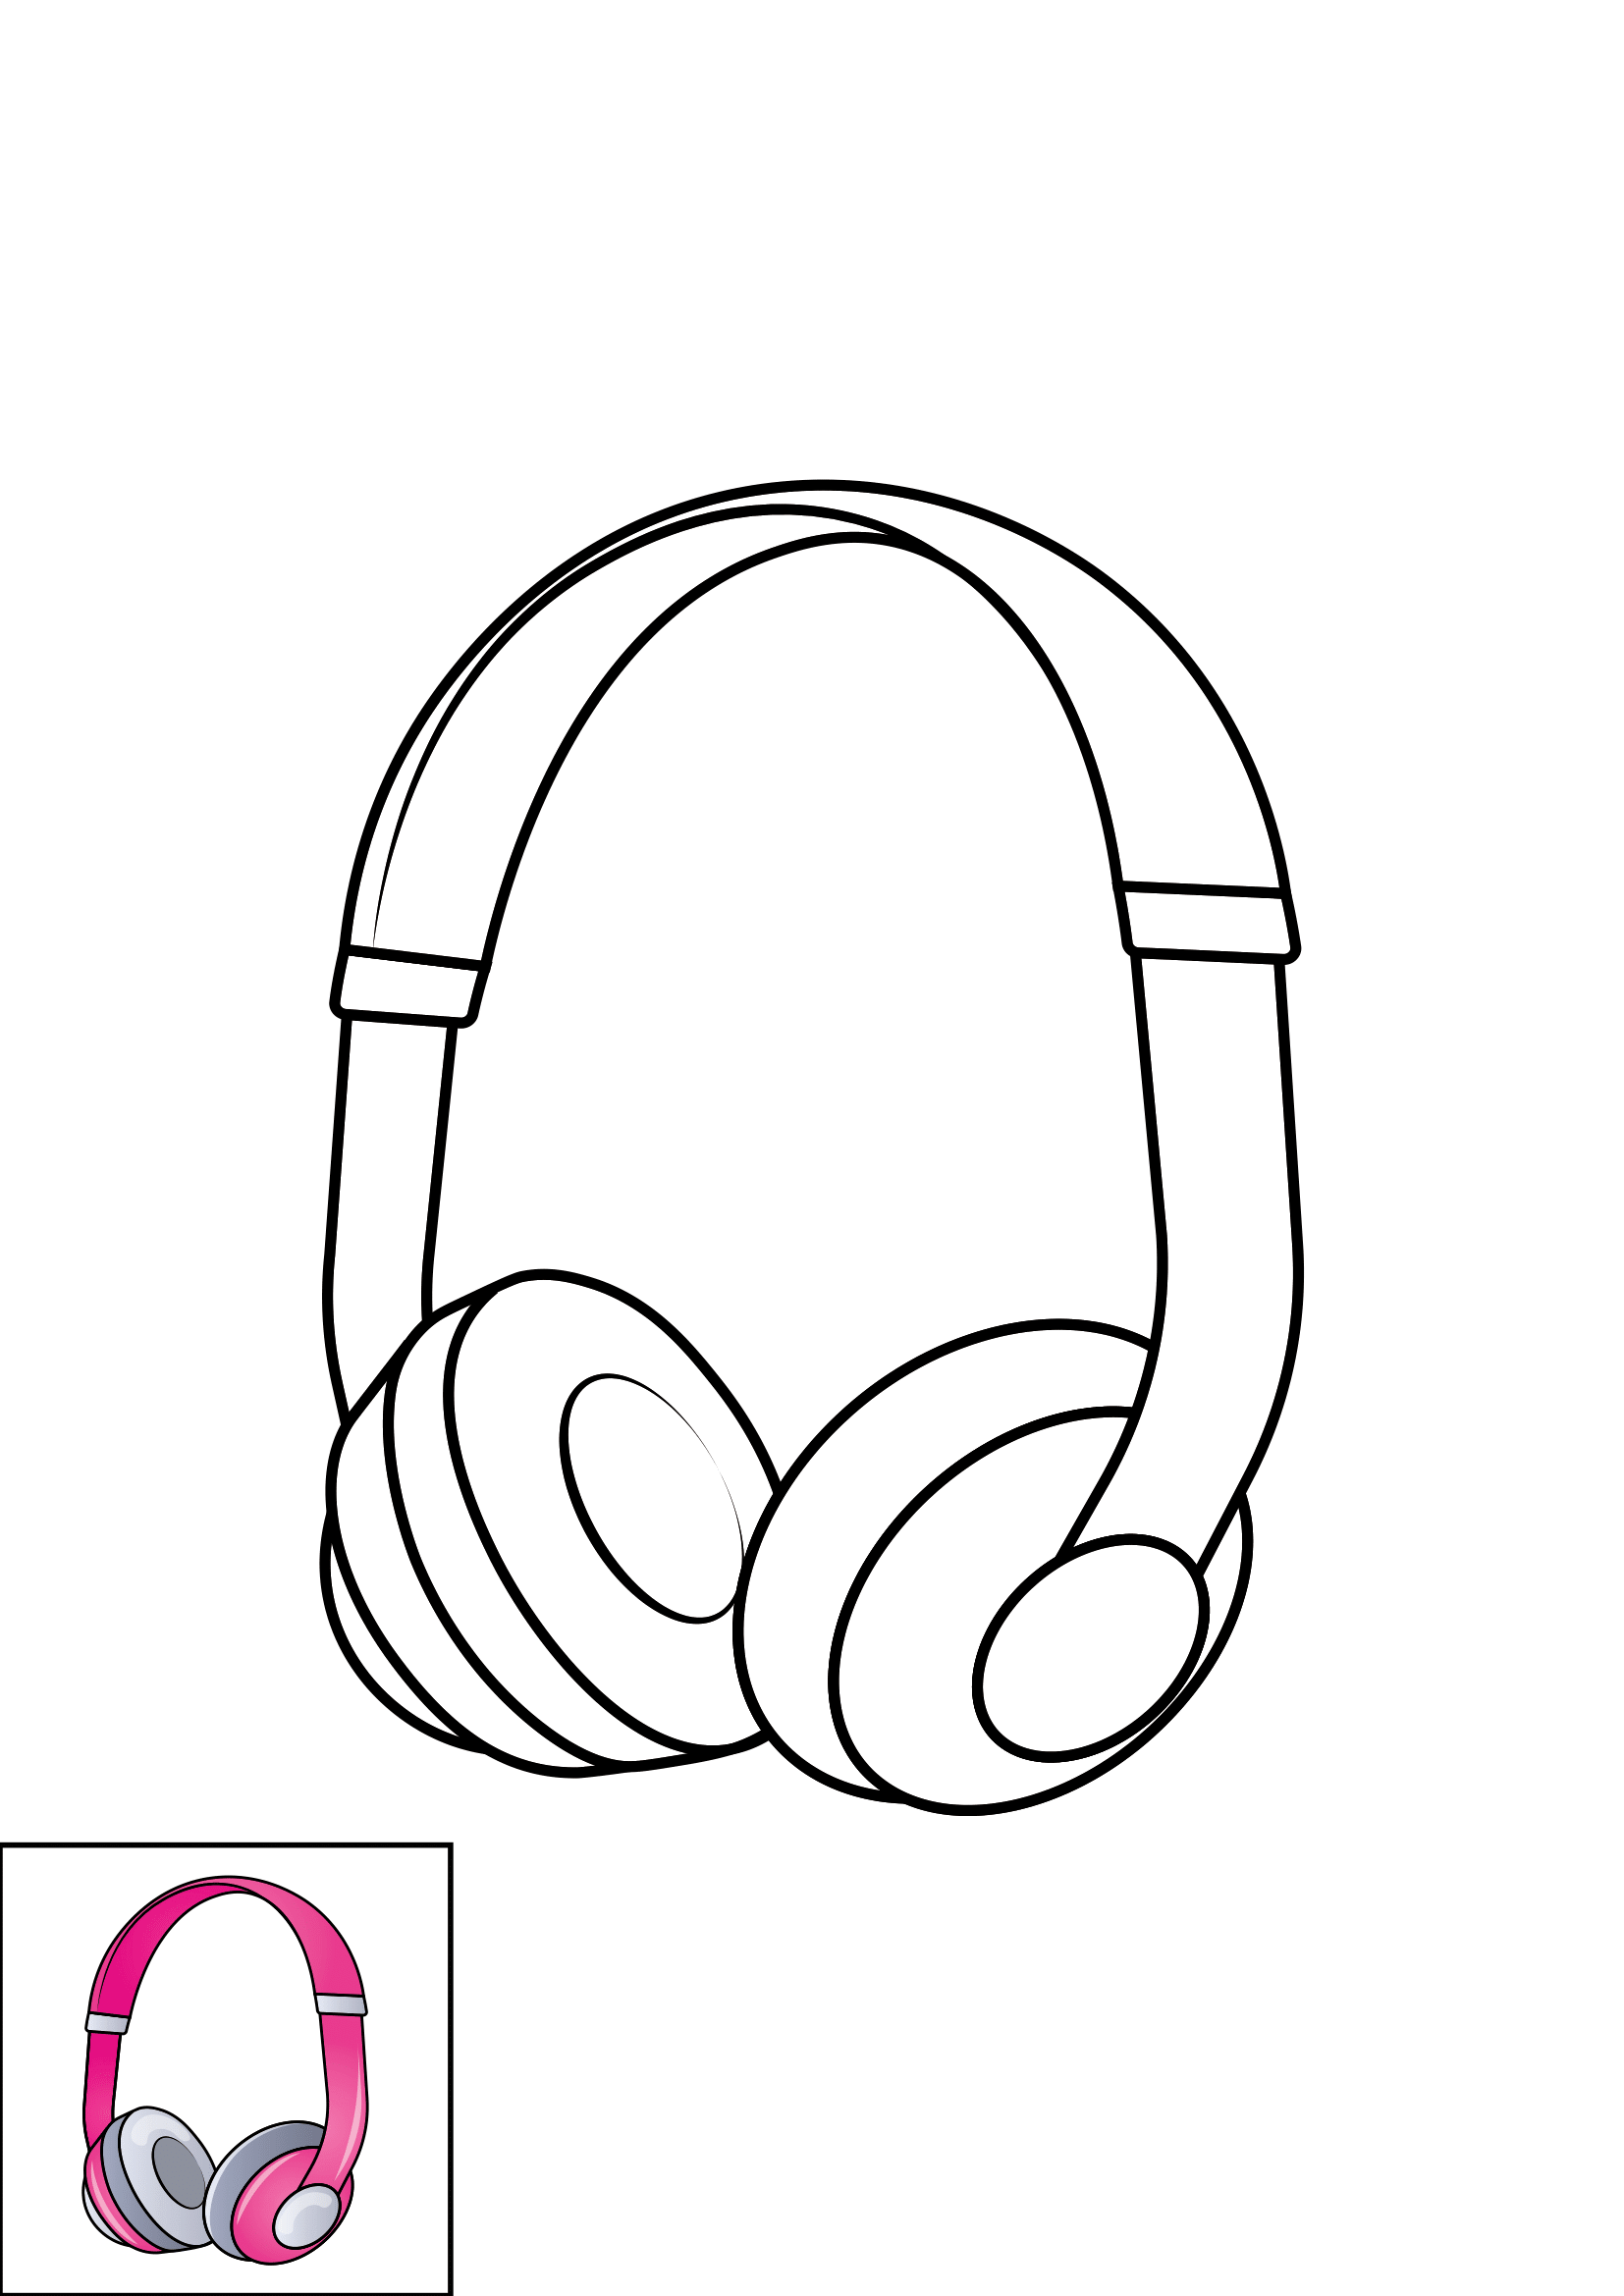 How to Draw Headphones Step by Step Printable Color